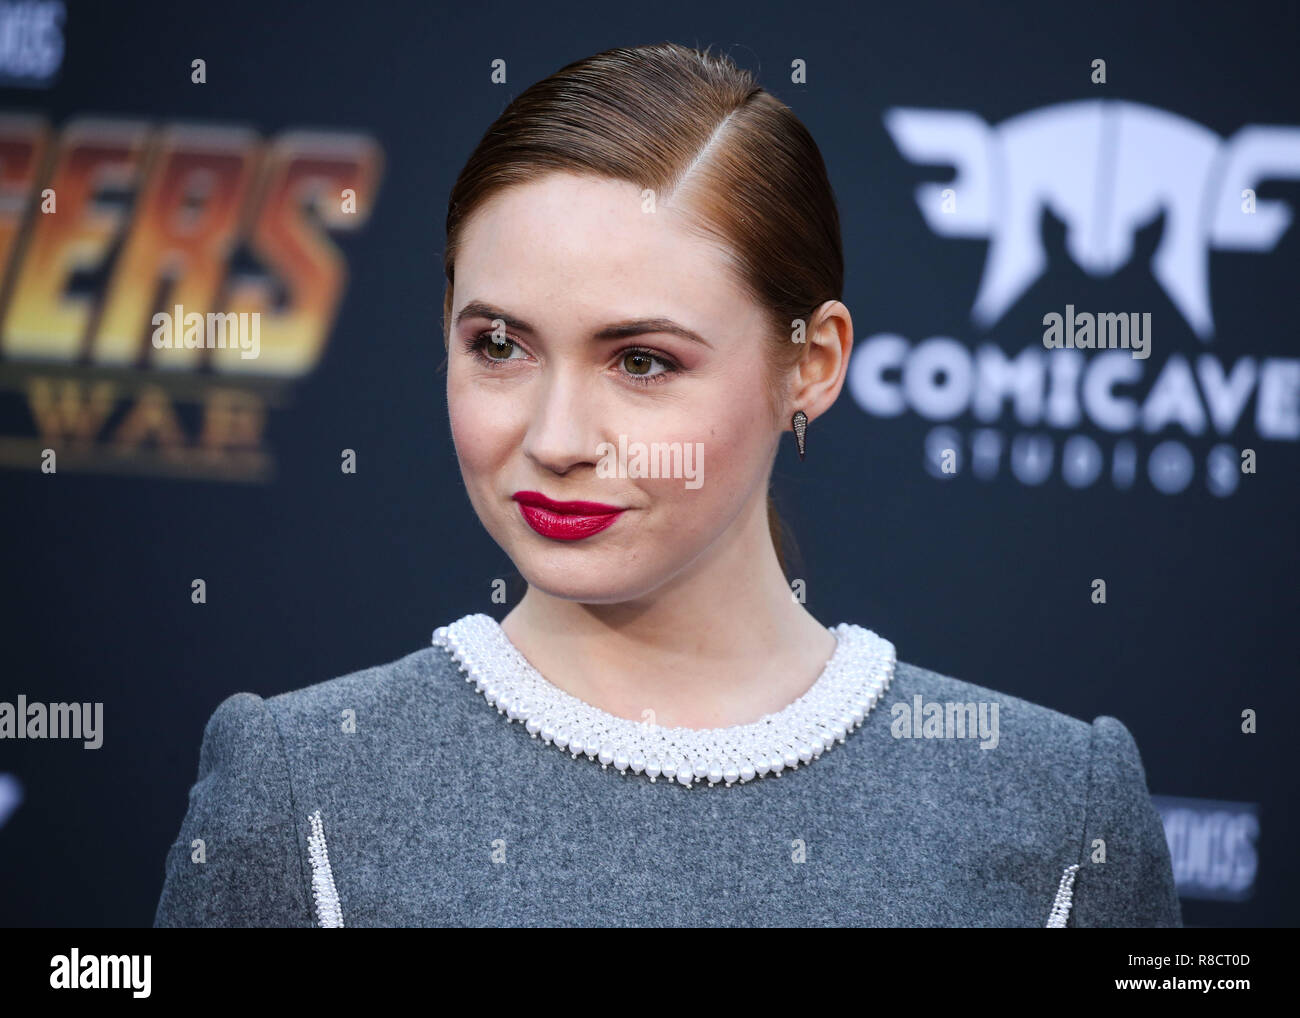 HOLLYWOOD, LOS ANGELES, CA, USA - APRIL 23: Karen Gillan at the World Premiere Of Disney And Marvel's 'Avengers: Infinity War' held at the El Capitan Theatre, Dolby Theatre and TCL Chinese Theatre IMAX on April 23, 2018 in Hollywood, Los Angeles, California, United States. (Photo by Xavier Collin/Image Press Agency) Stock Photo